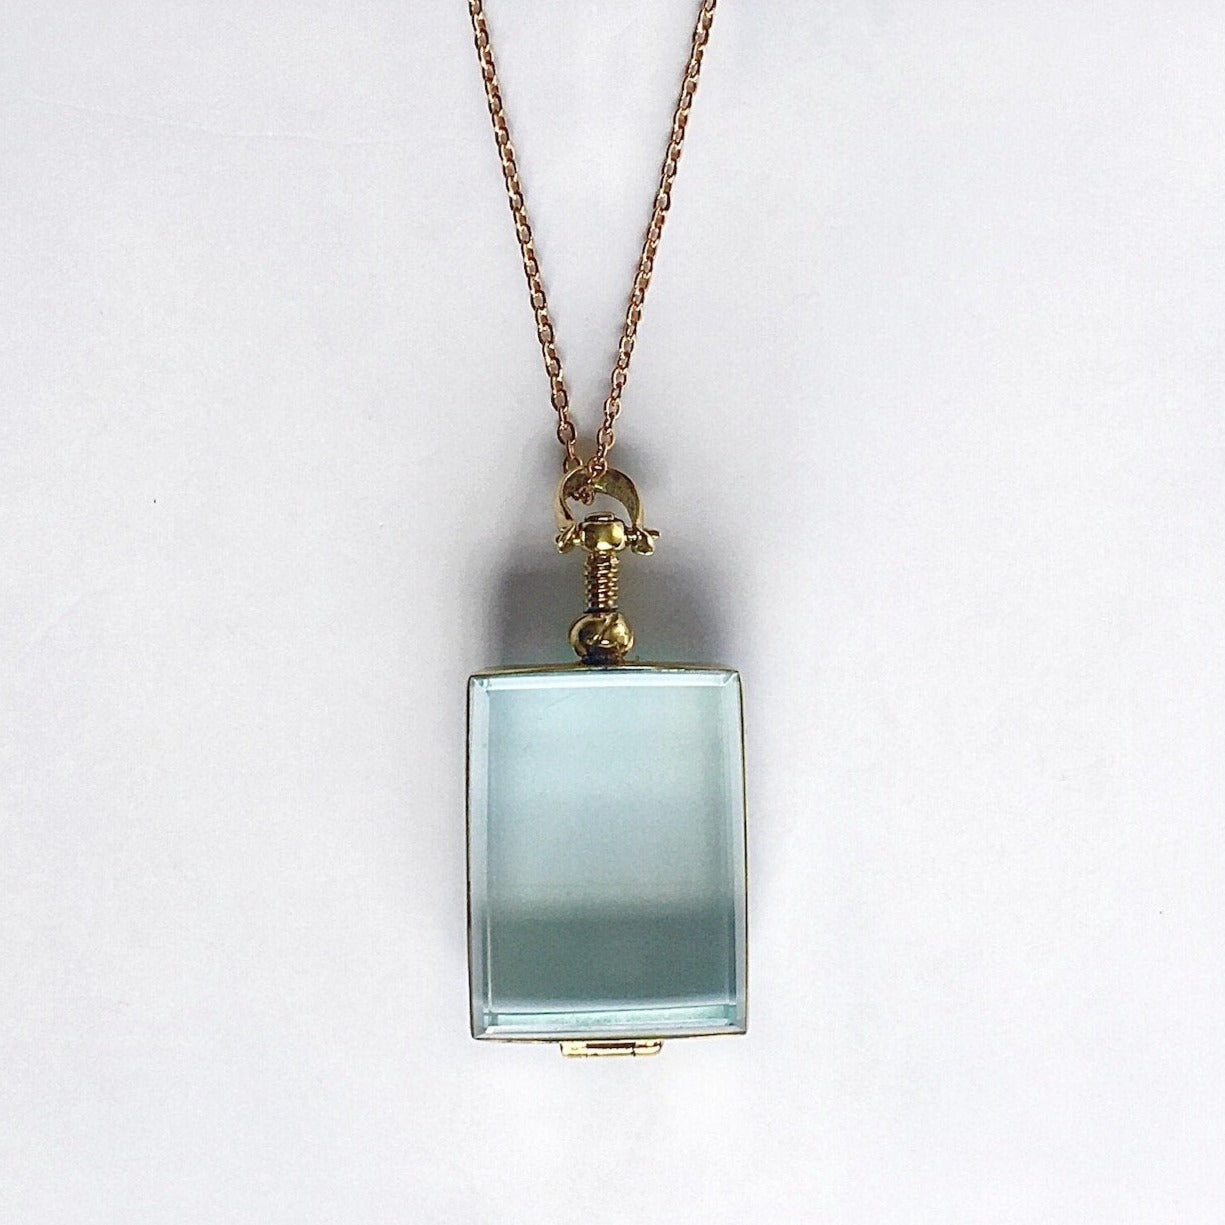 Rectangle Shaped Gold Locket for Hair, Glass Locket for Photo Locket, Gold Plated Locket, Statement Locket,Glass Locket Pendant for Necklace